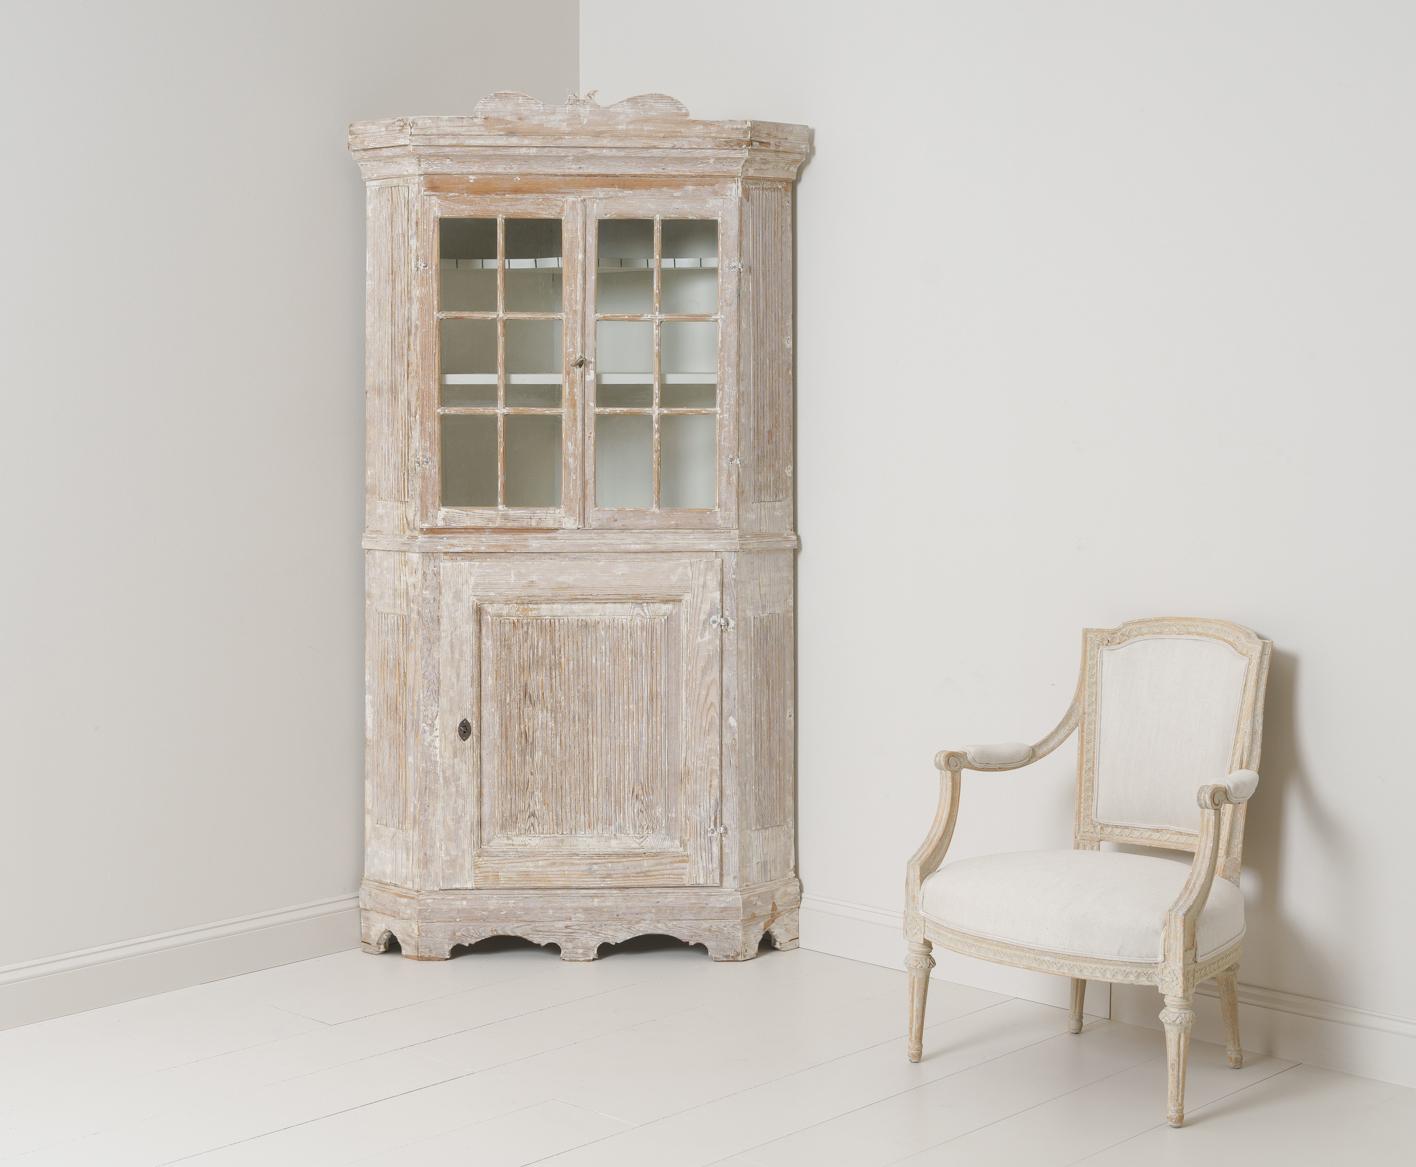 A late Baroque period corner vitrine cabinet from the 18th century in hand-scraped original paint with scalloped base and reeded sides and door. Original lock with key. Original glass. The upper section contains two shelves, the top shaped and